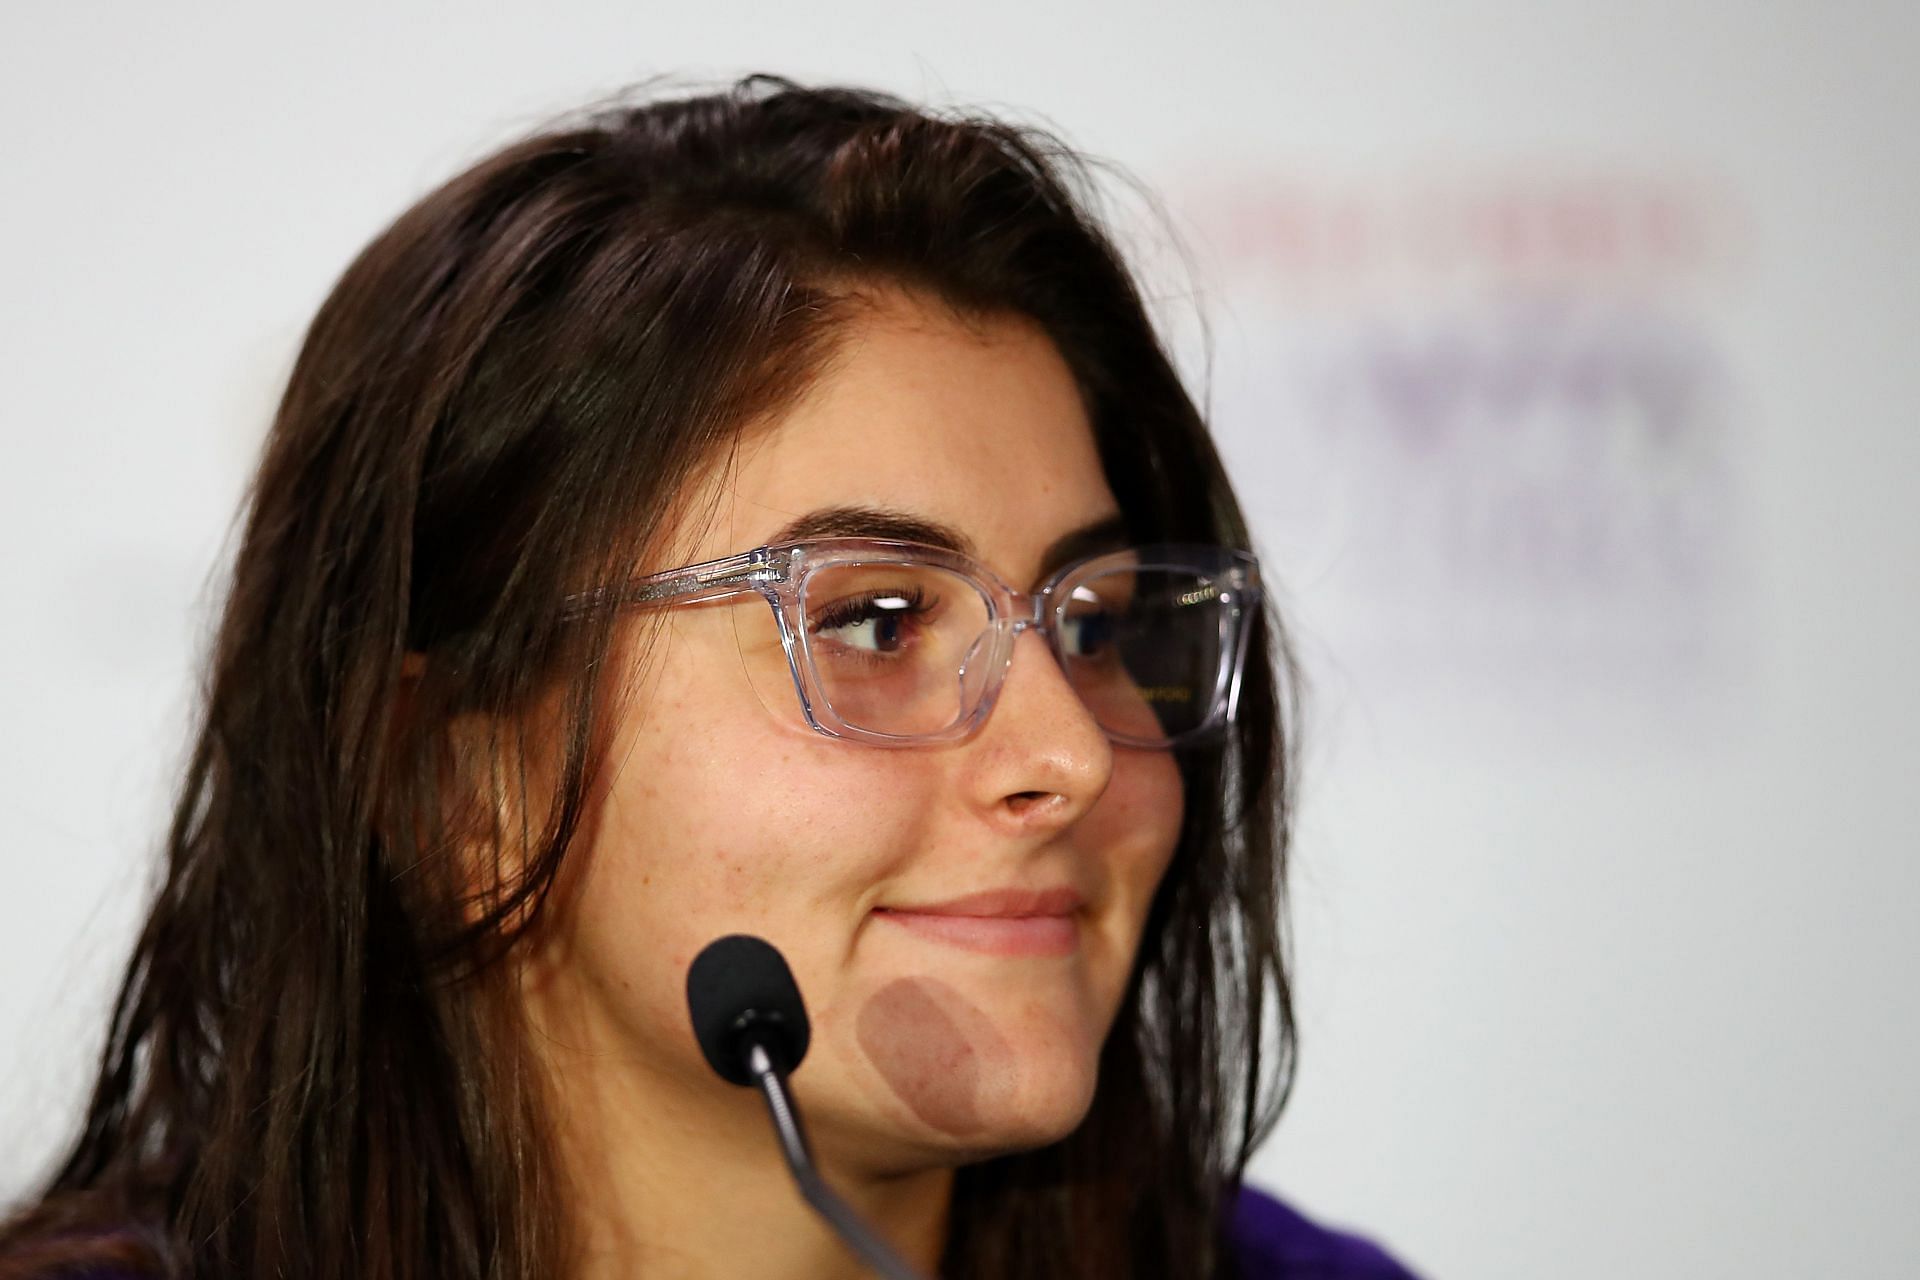 Bianca Andreescu hopes to get into the Top 10